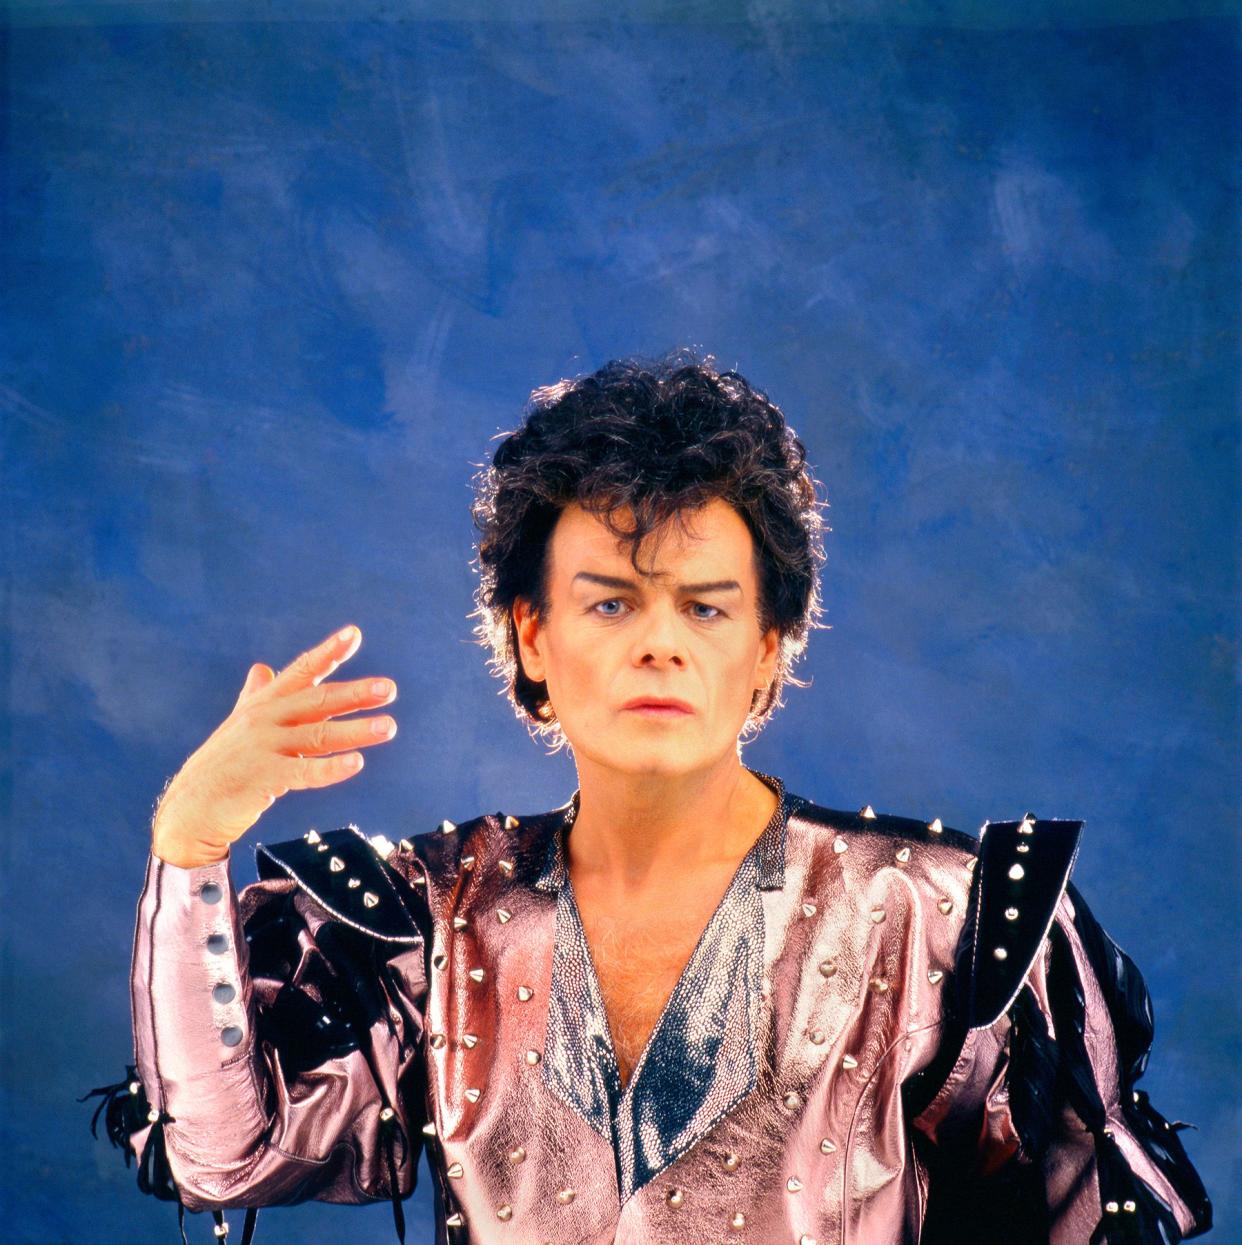 Paul Francis Gadd (born 8 May 1944), known by the stage name Gary Glitter, is an English former glam rock singer who achieved popular success in the 1970s and 80s.